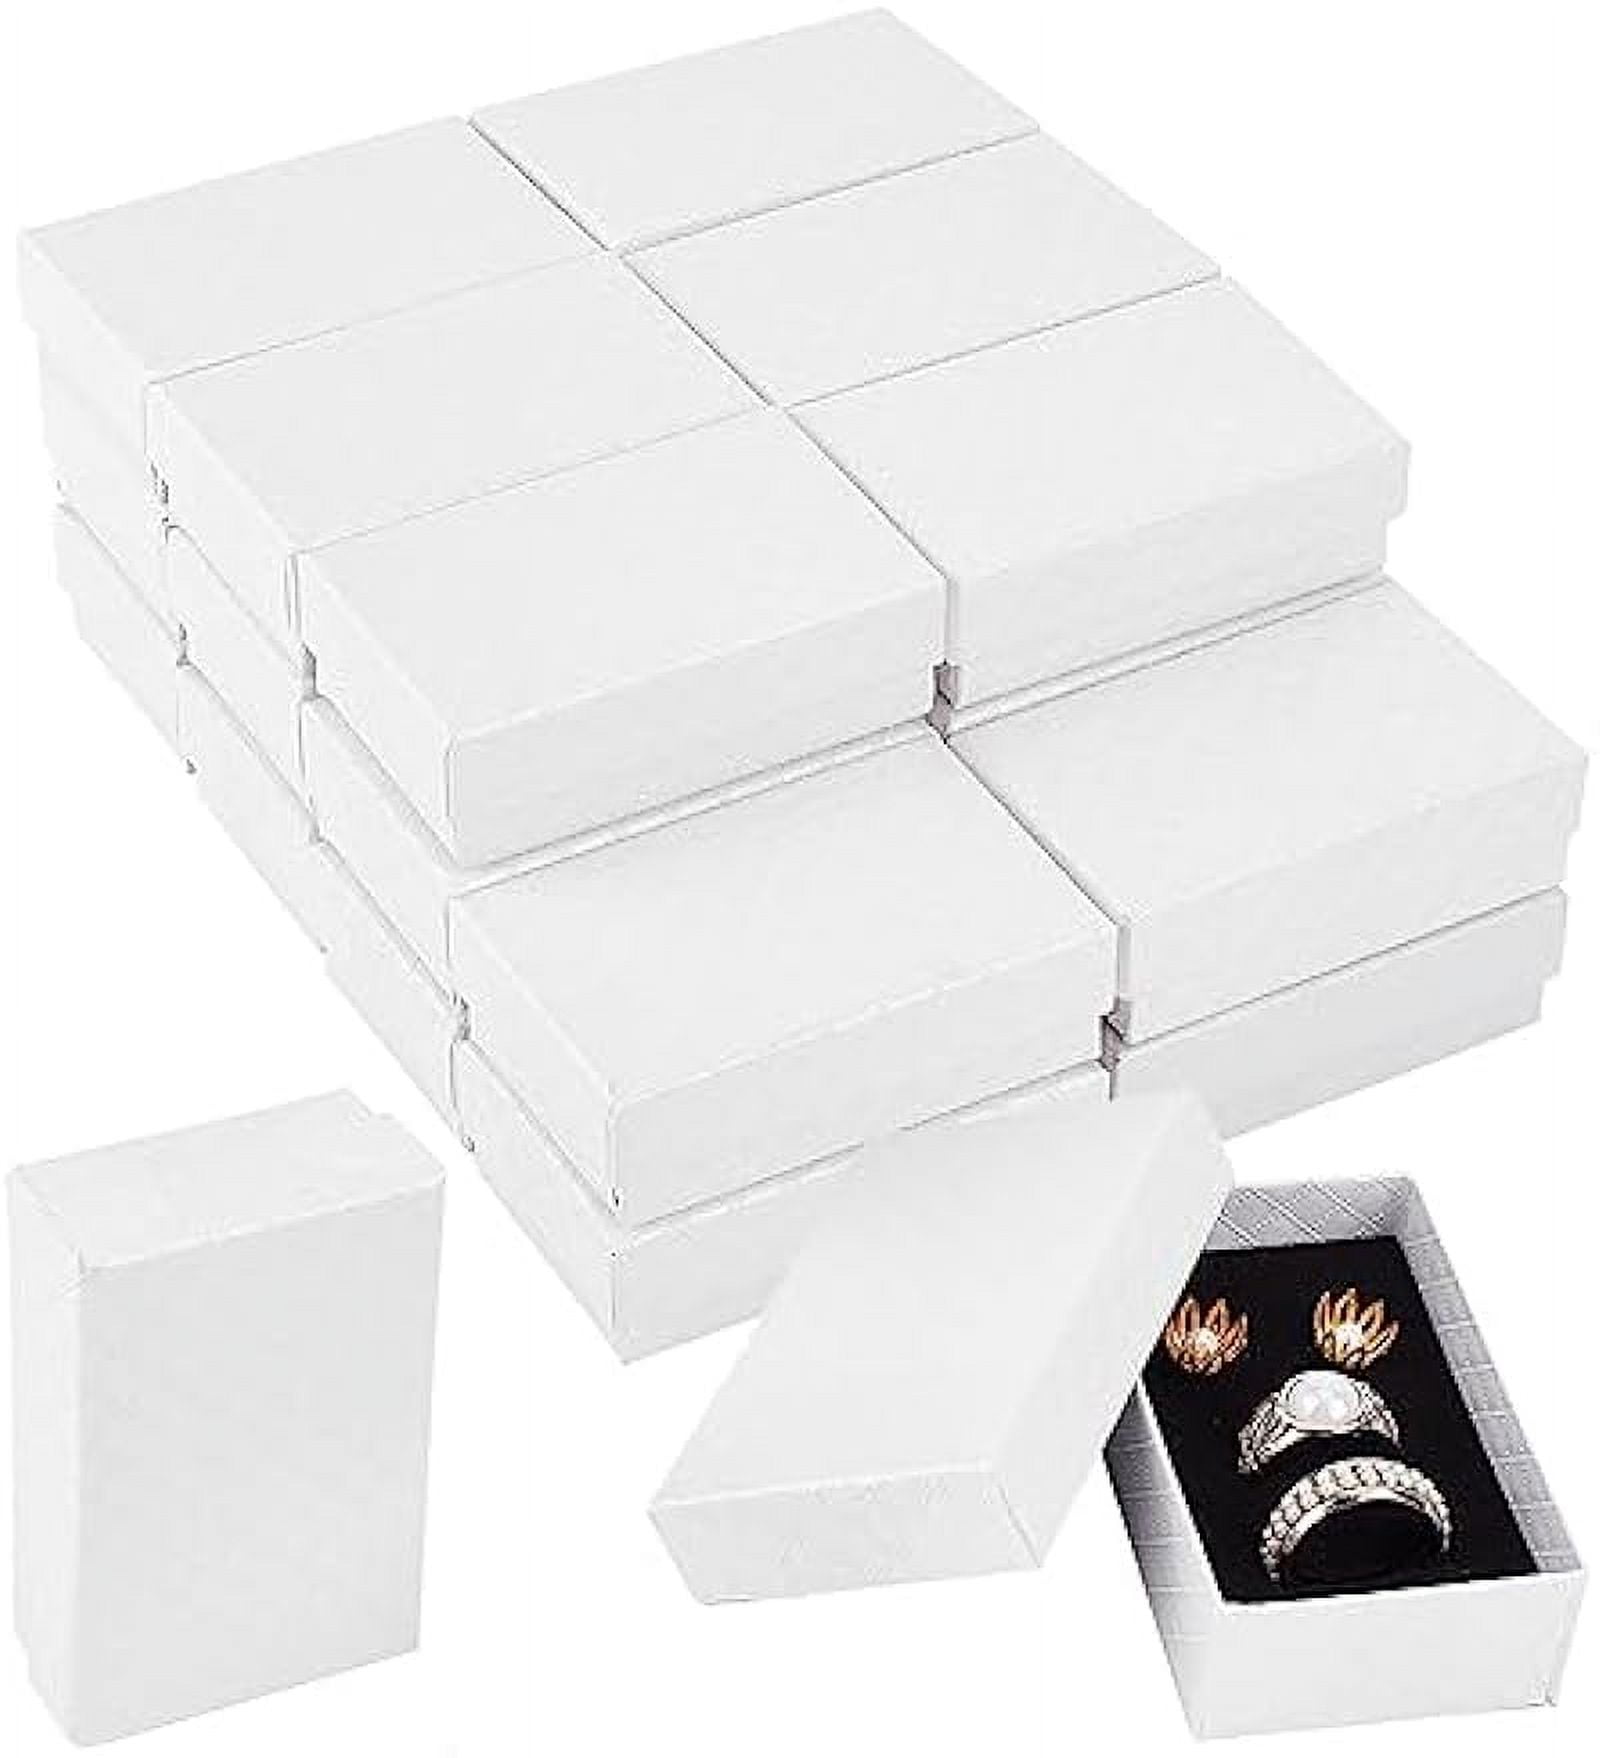 Prestige & Fancy White Jewelry Gift Boxes 50 Pack, 2 x 1.75 x 1.12 Cardboard Gift Boxes with Flocked Foam Ring and Earring Slot, Small Jewelry Boxes